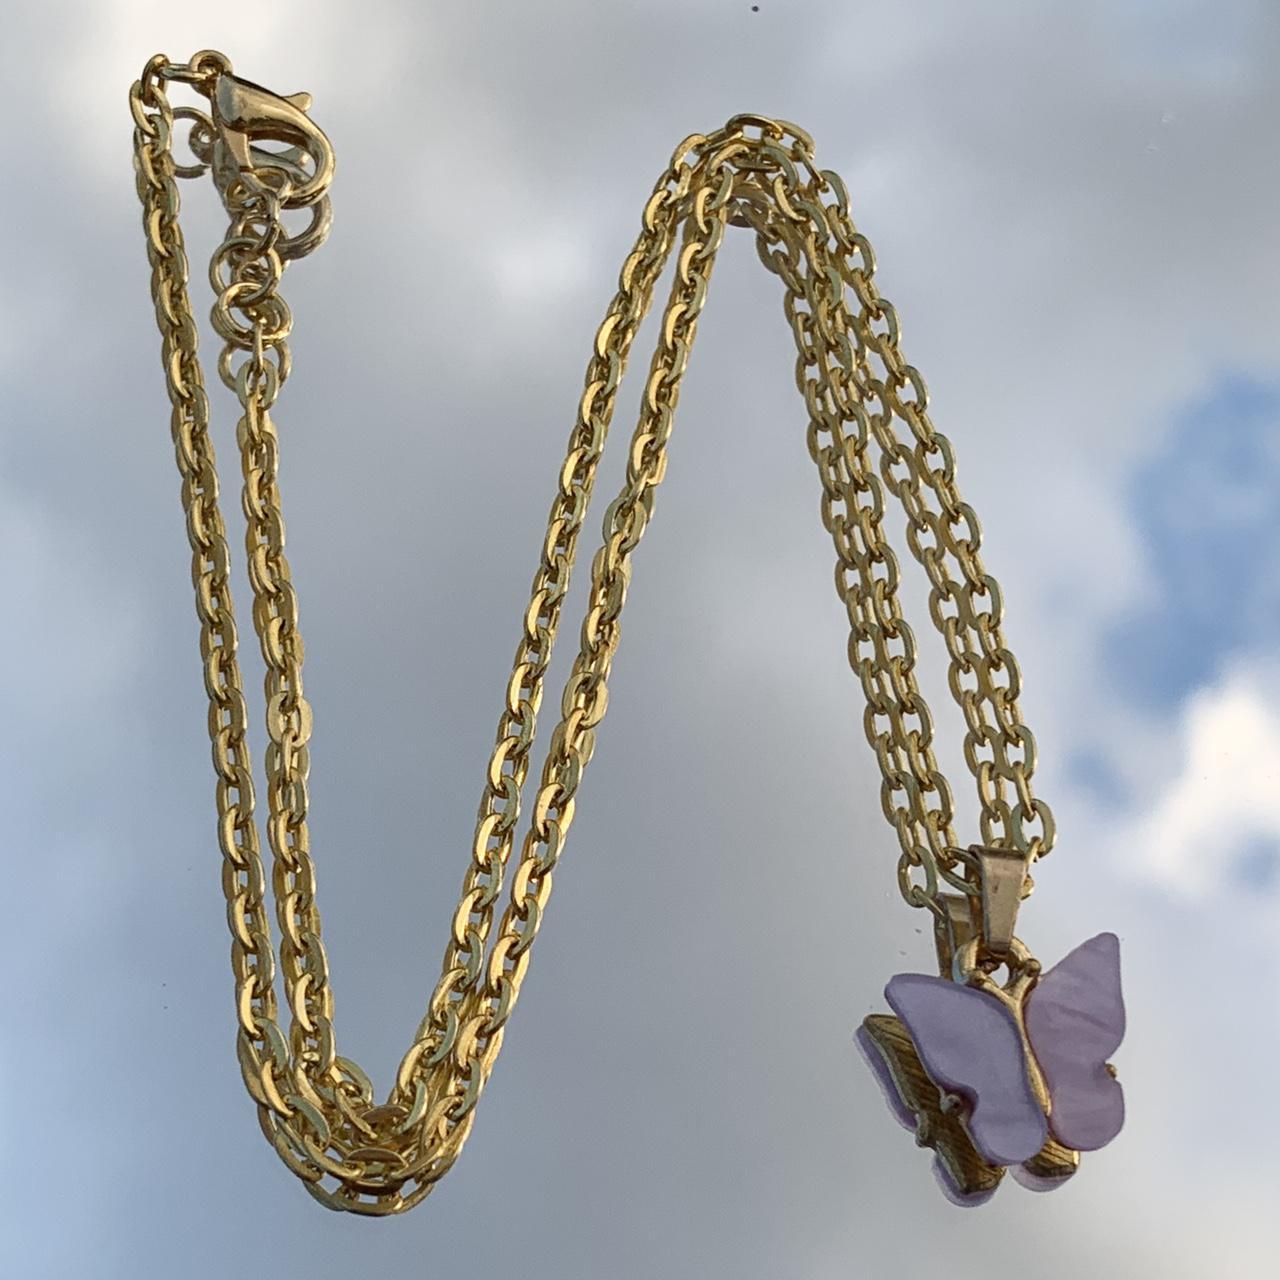 Product Image 2 - purple butterfly necklace

• the necklace